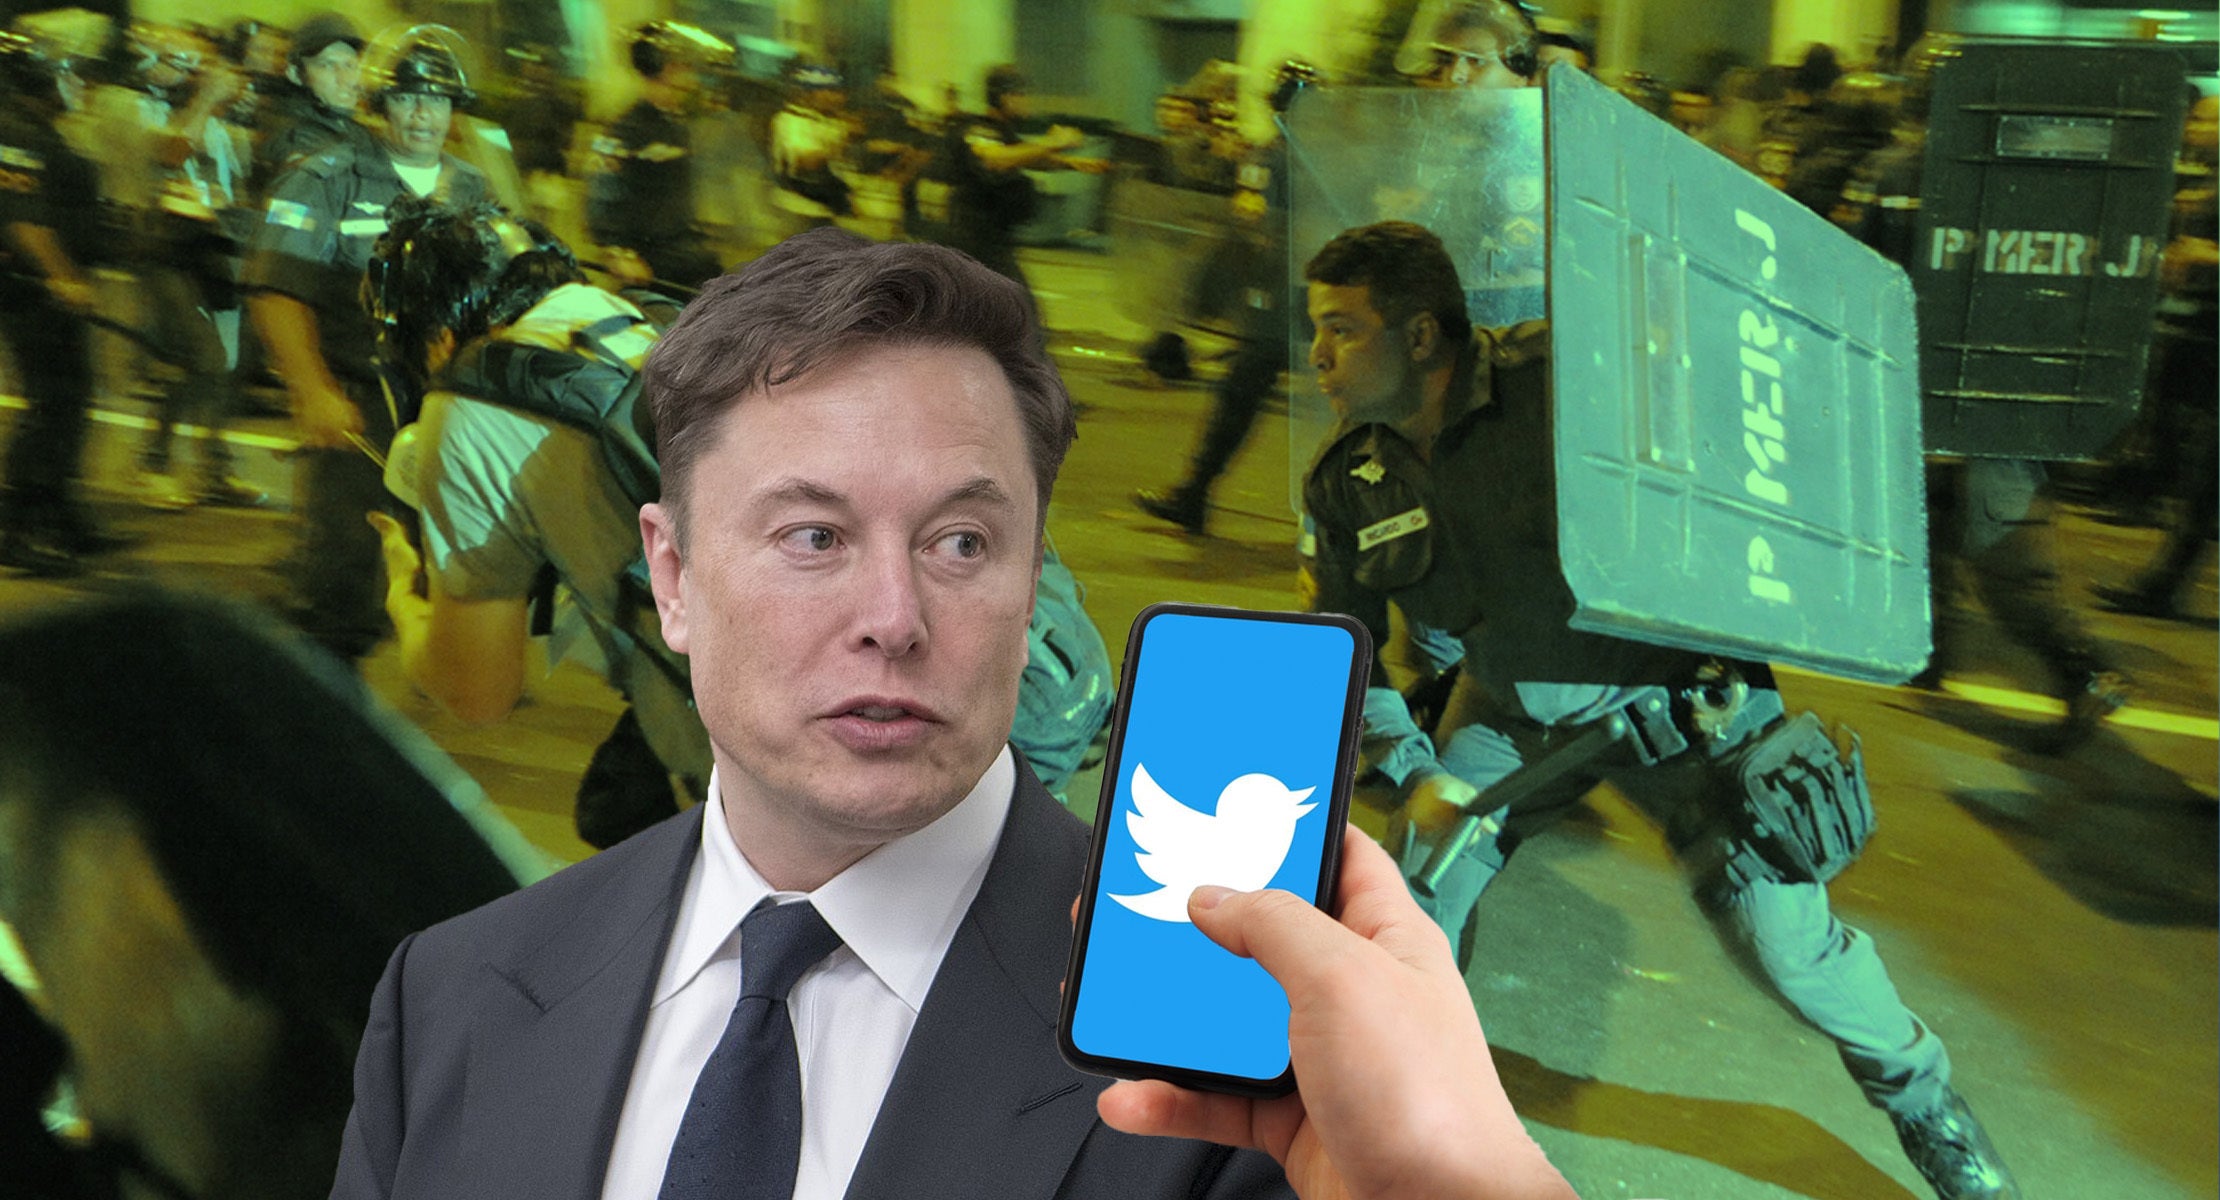 Elon Musk Calls On Brazilians To 'Resolve Matters Peacefully' After Election Deniers Stormed Capital